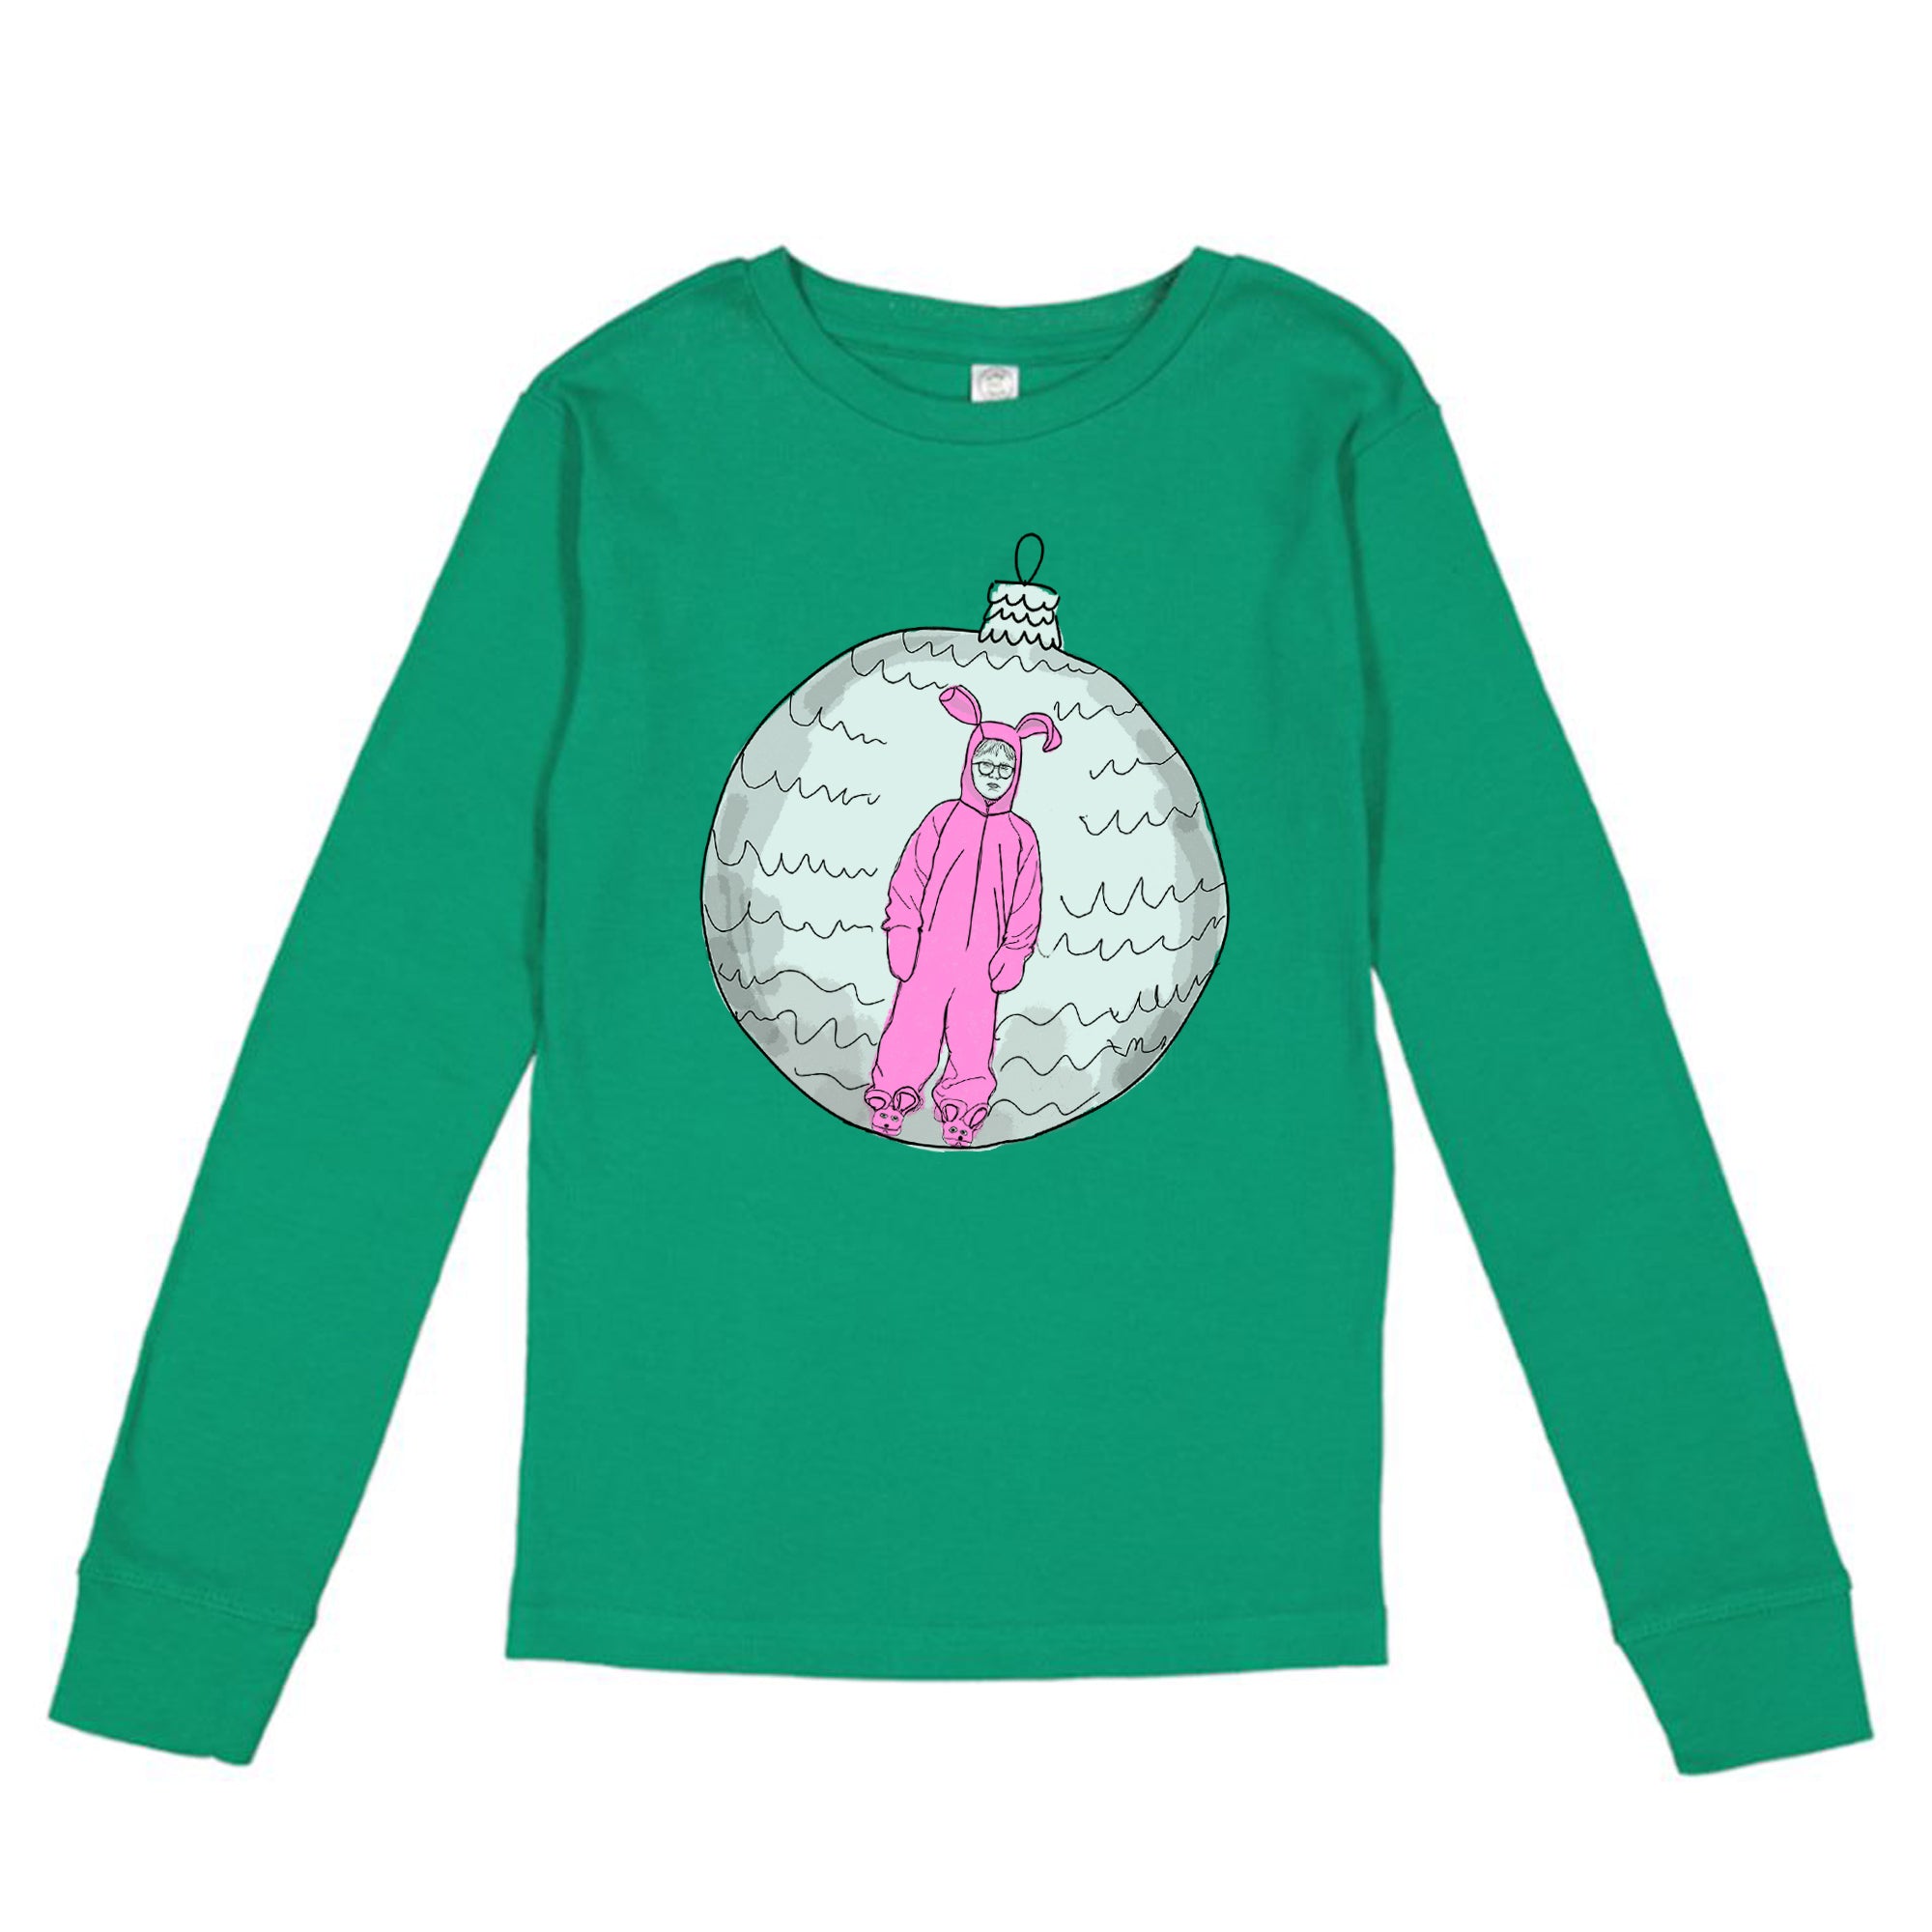 Toddler Holiday PJ Tops - More styles available